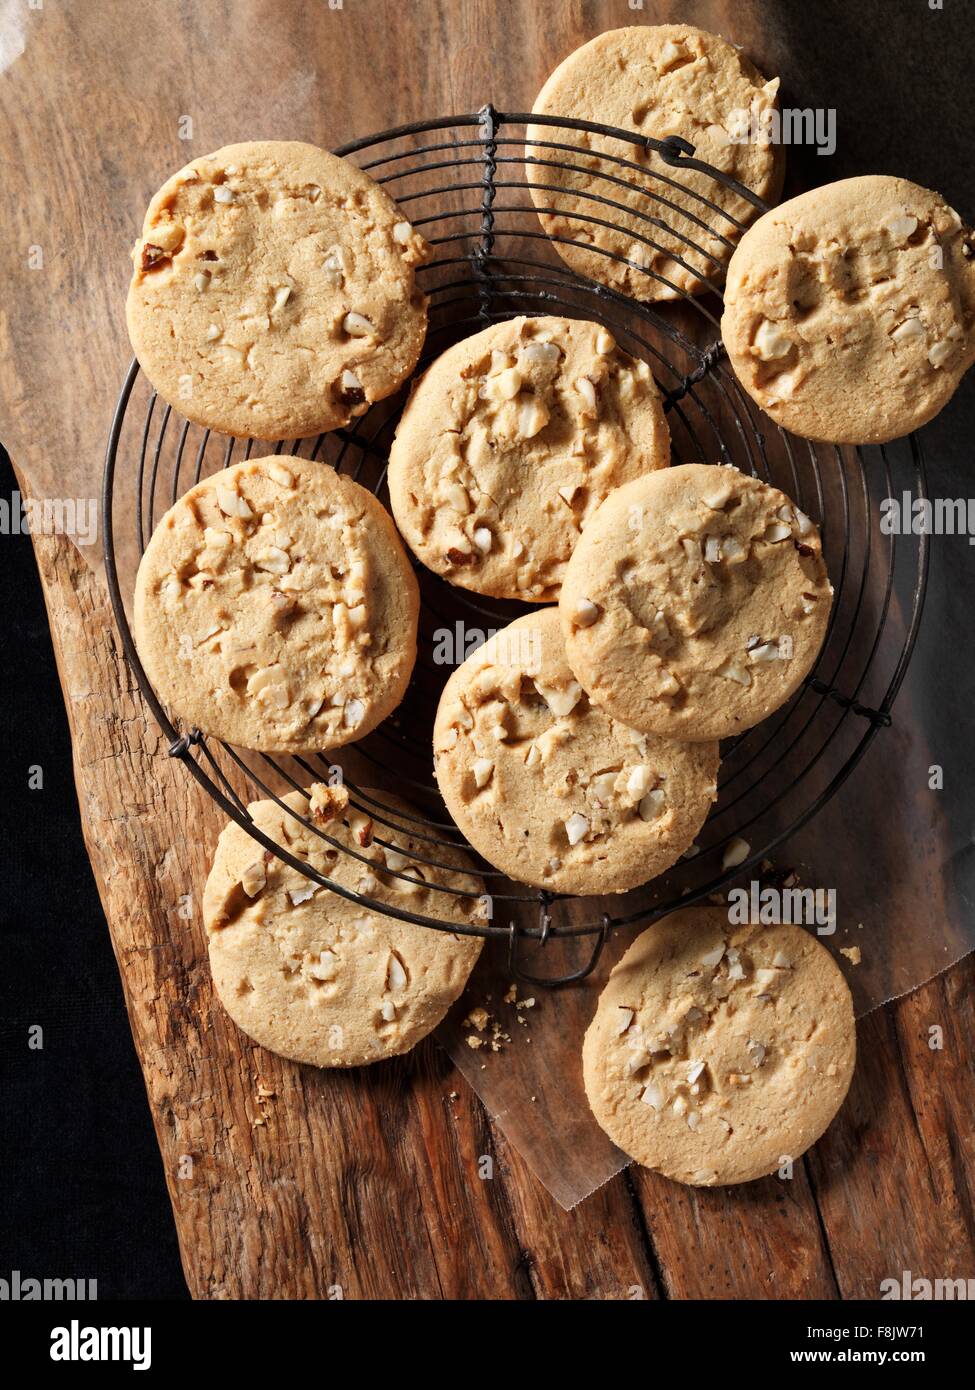 Overhead view of brazil nut crunchy cookies on wood Stock Photo